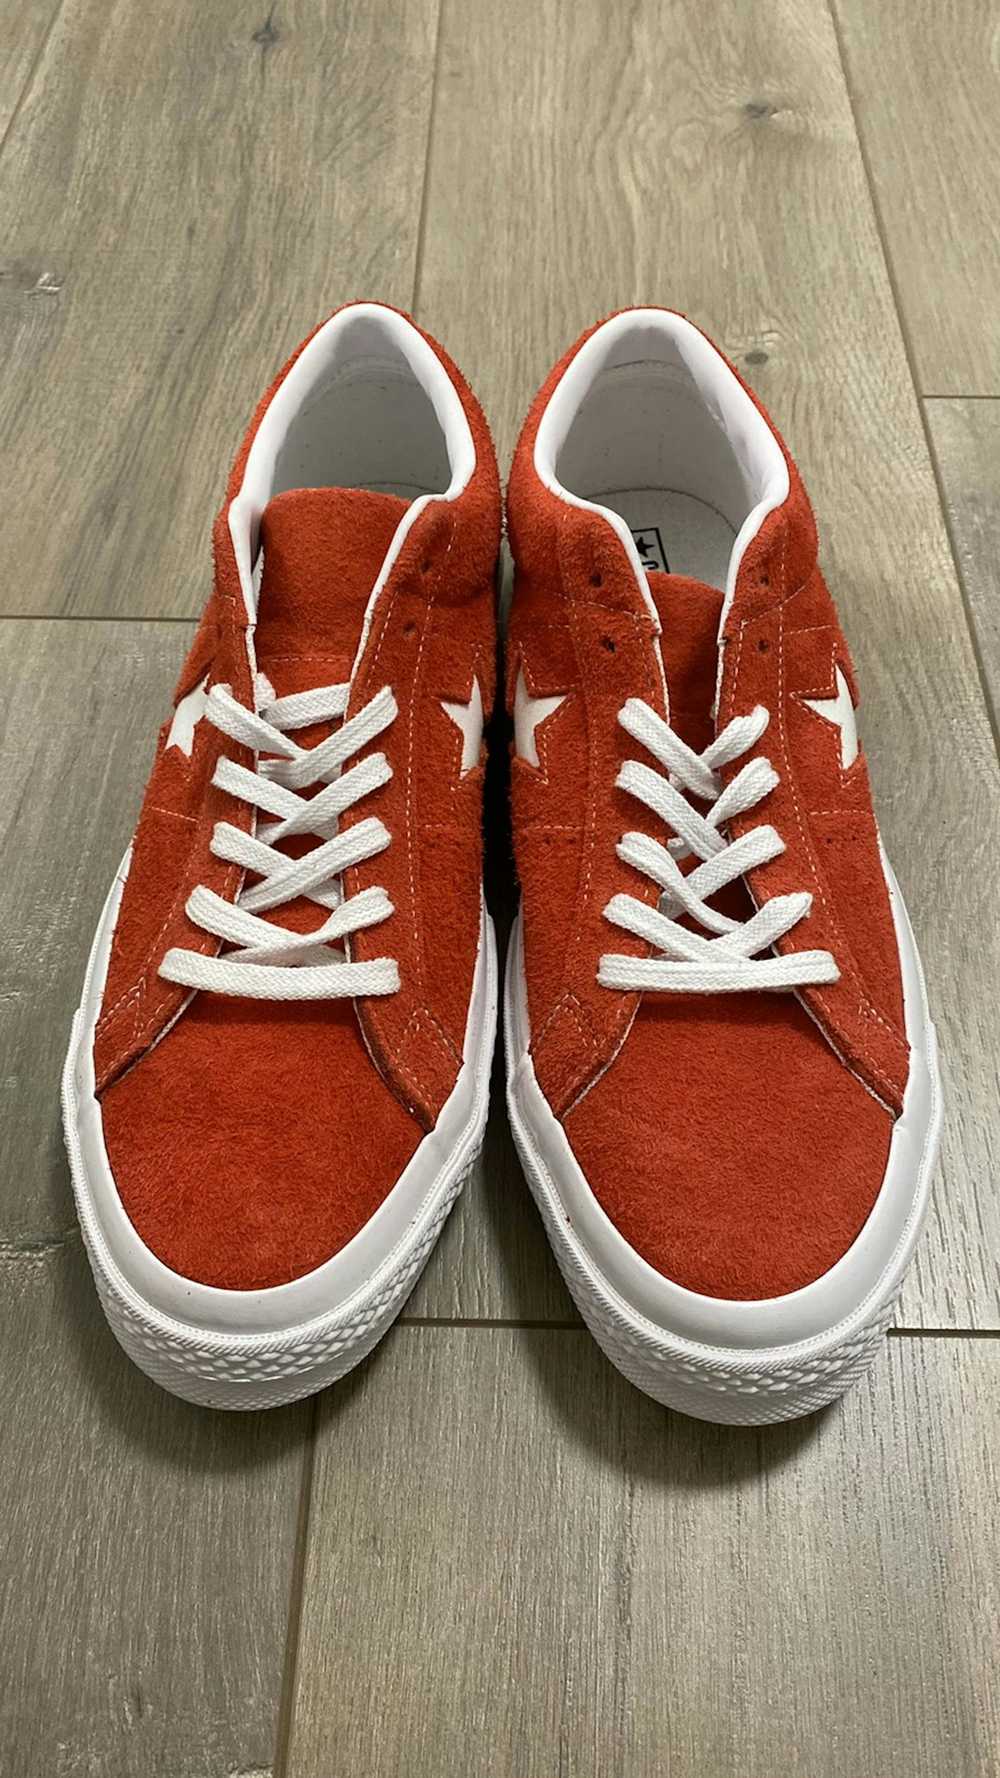 Converse One Star Ox Red Suede - image 1